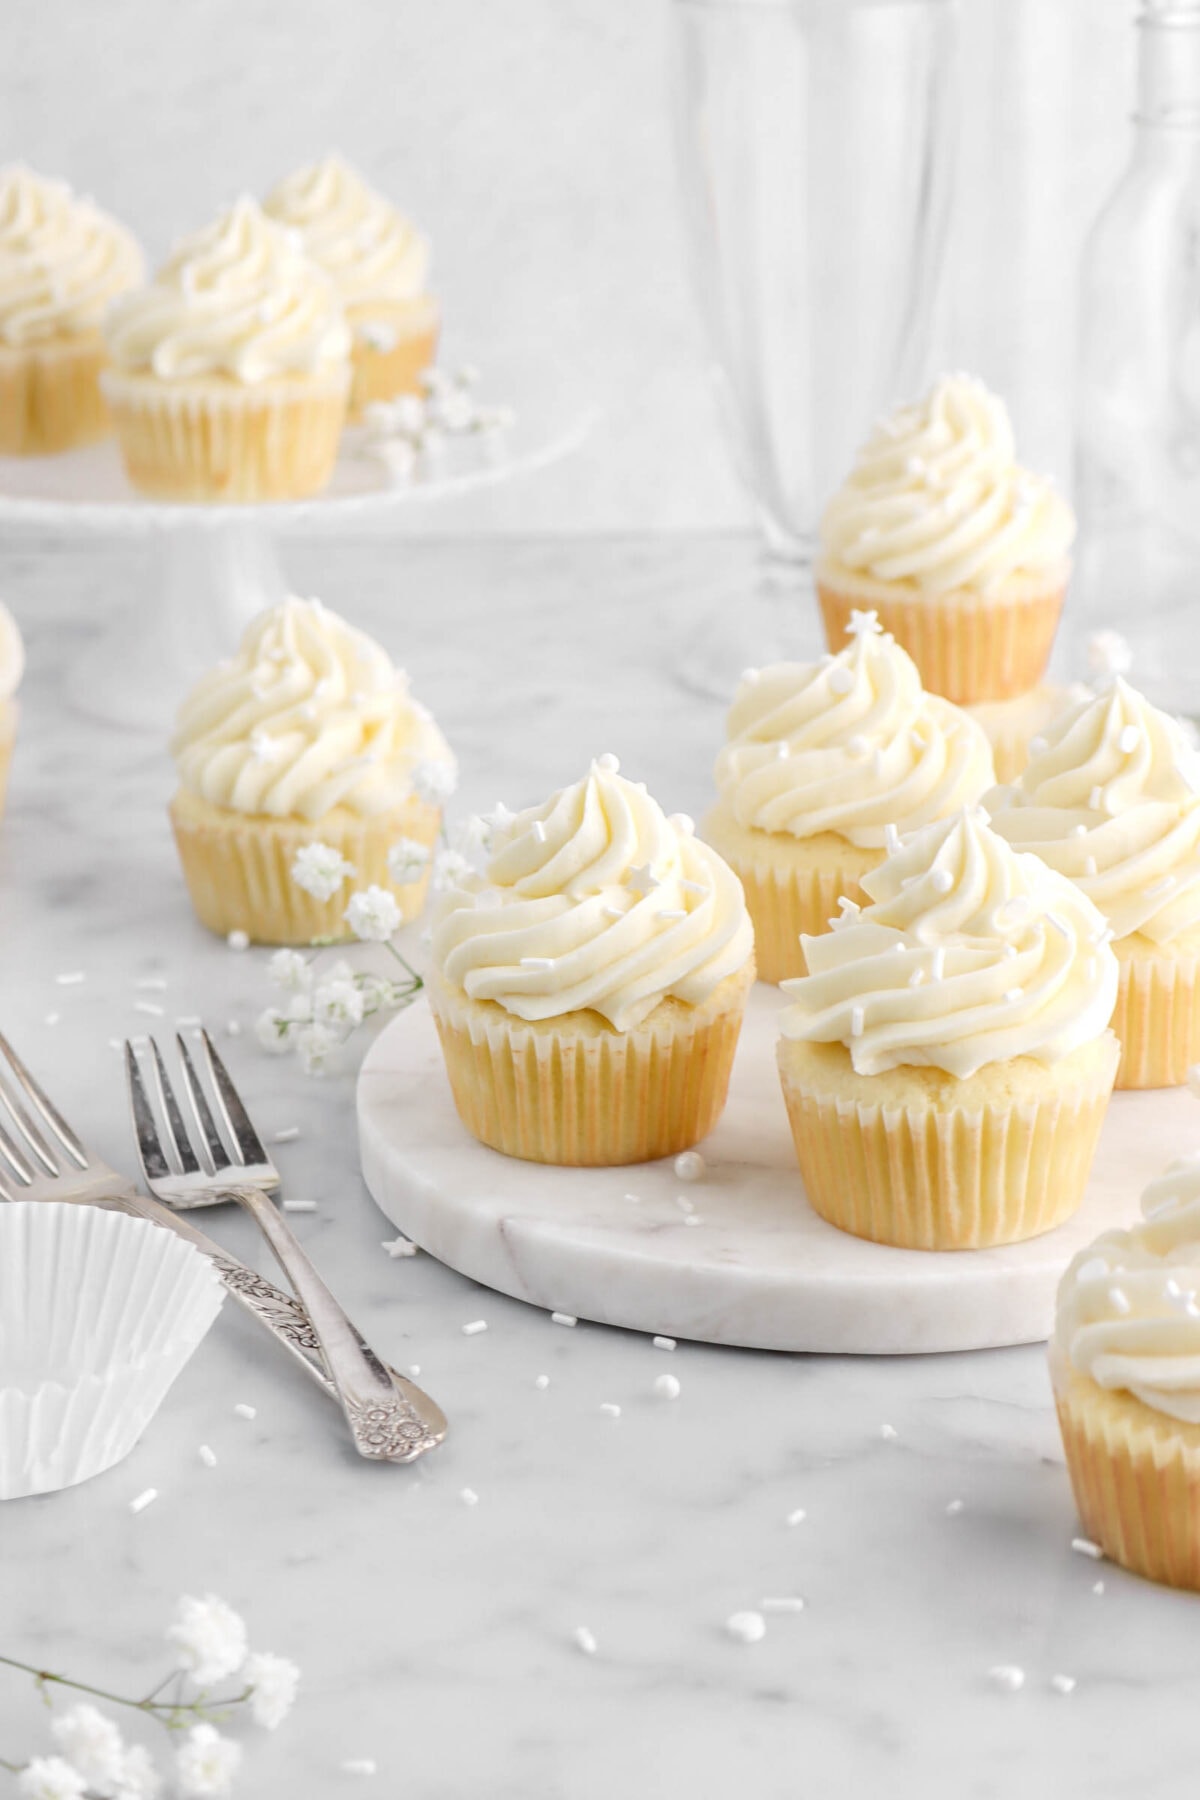 four vanilla cupcakes on marble plate with more cupcakes around with white sprinkles around, white flowers, two forks, and an empty cupcake paper beside.